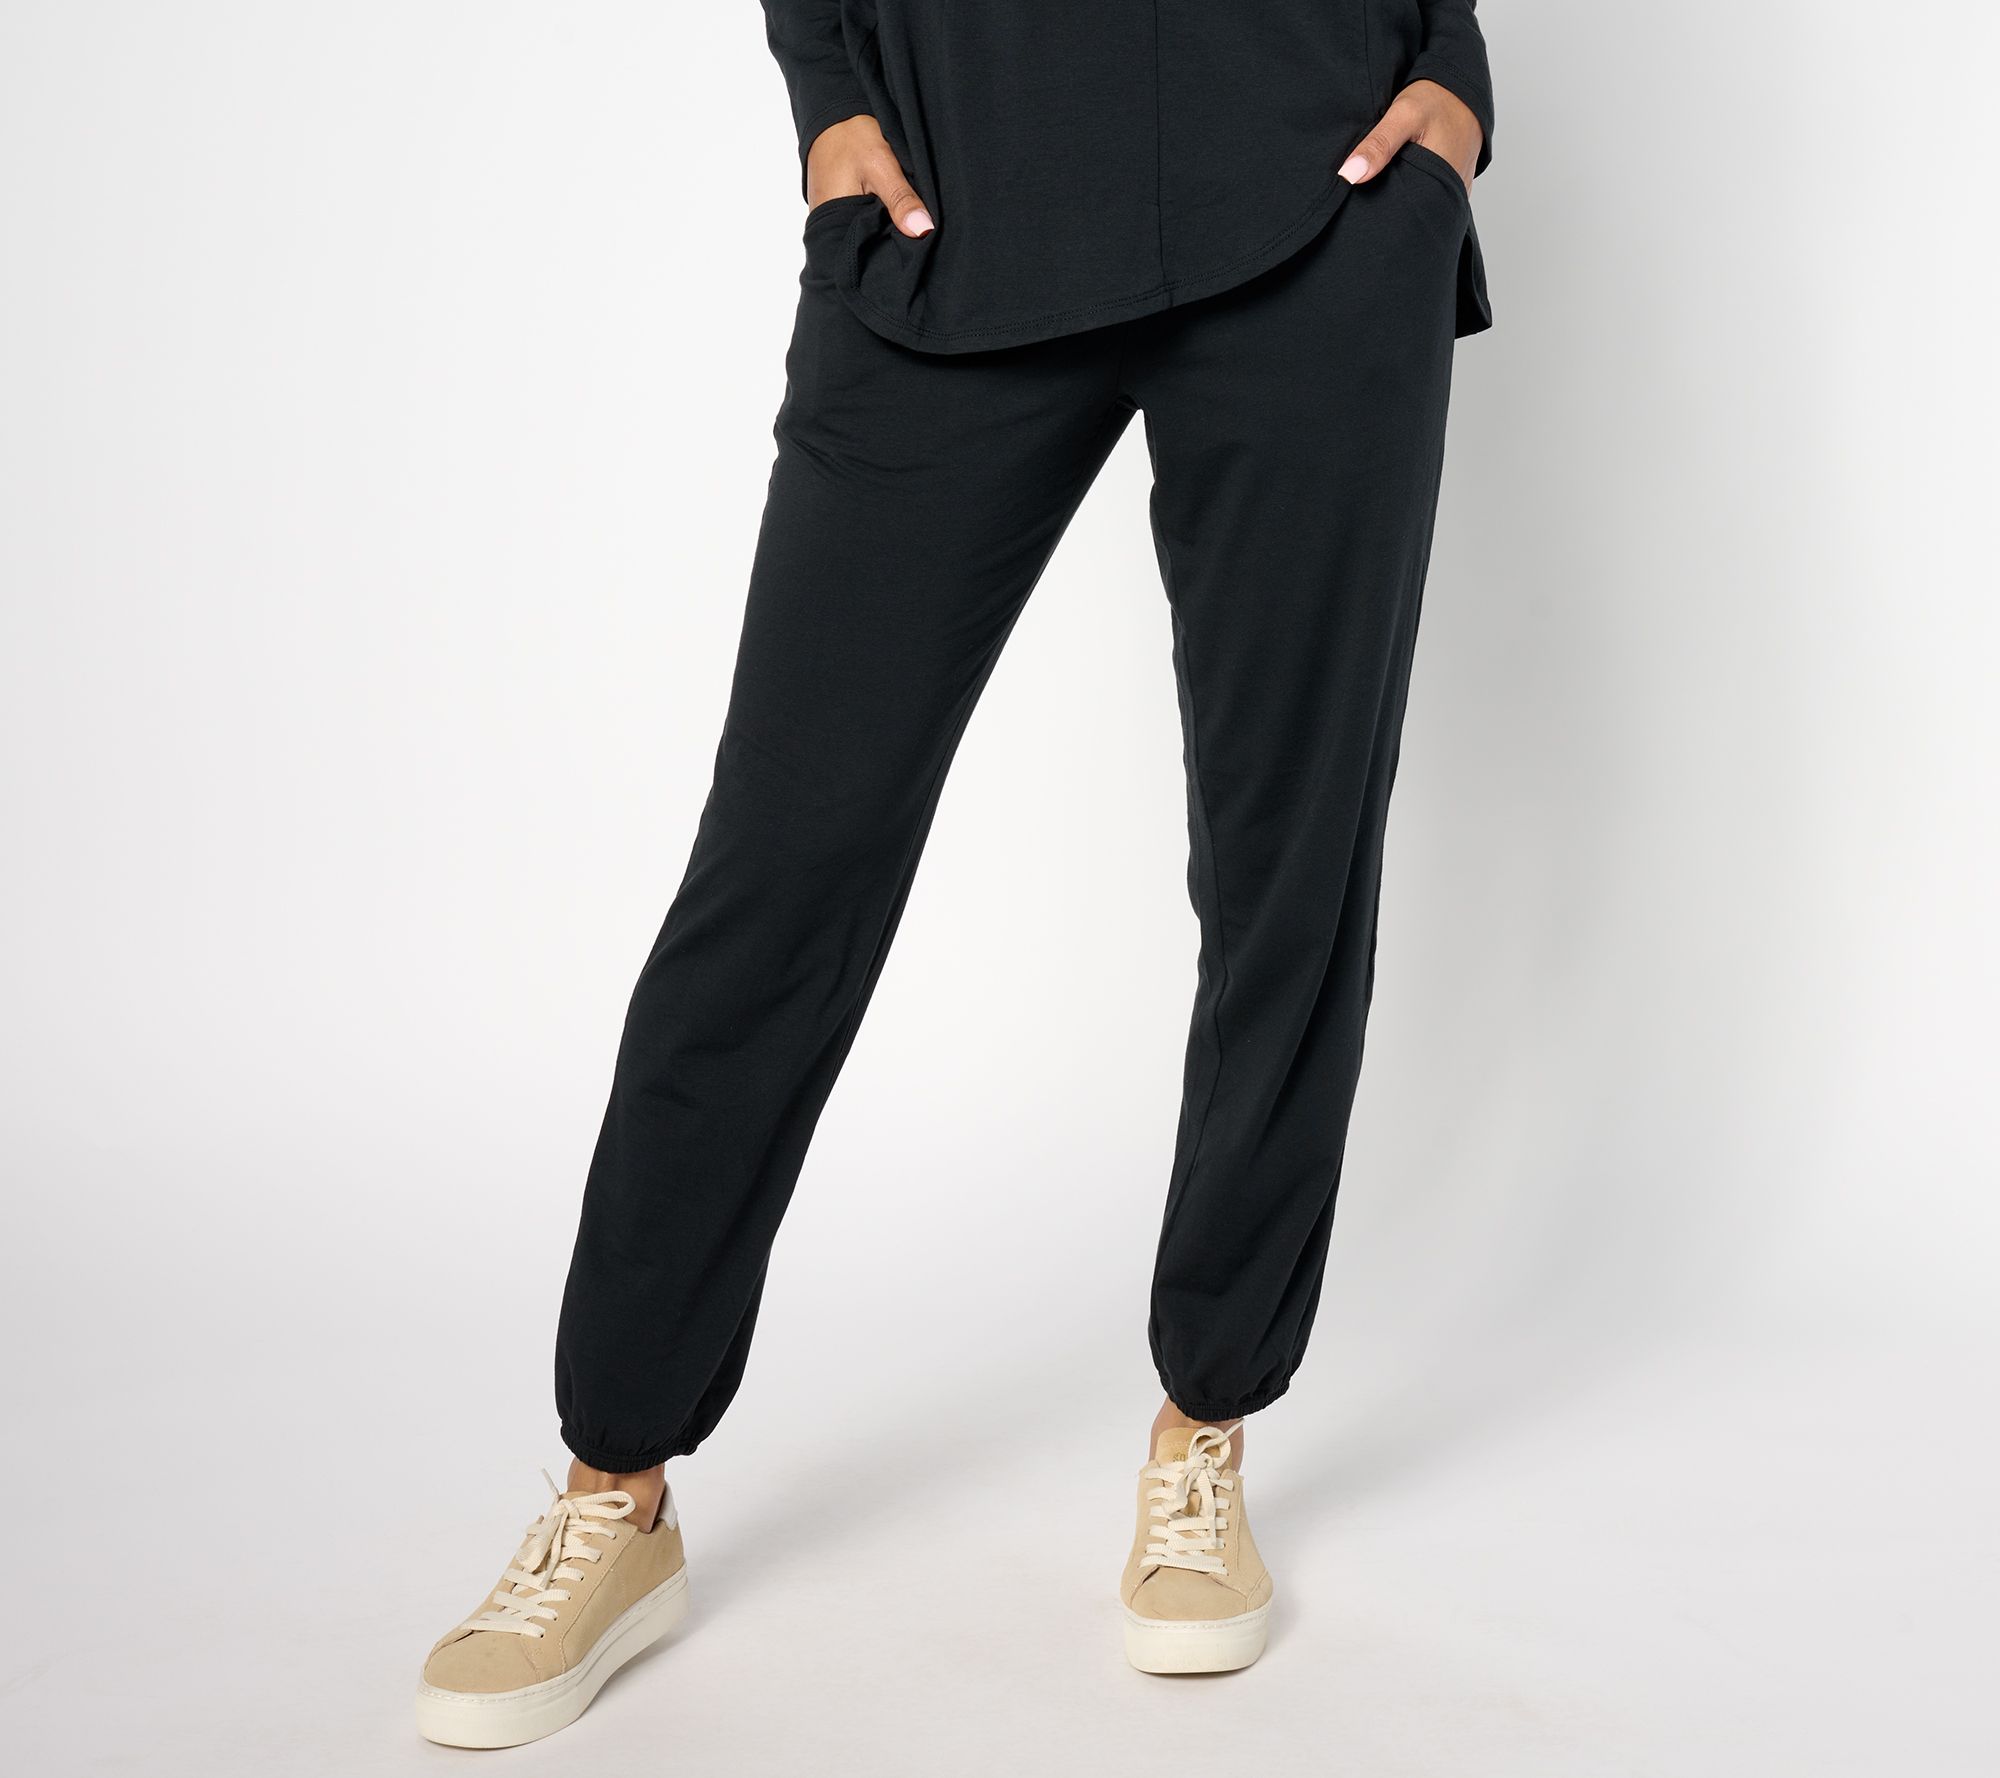 AnyBody Lounge Cozy Knit Ruched Pant 